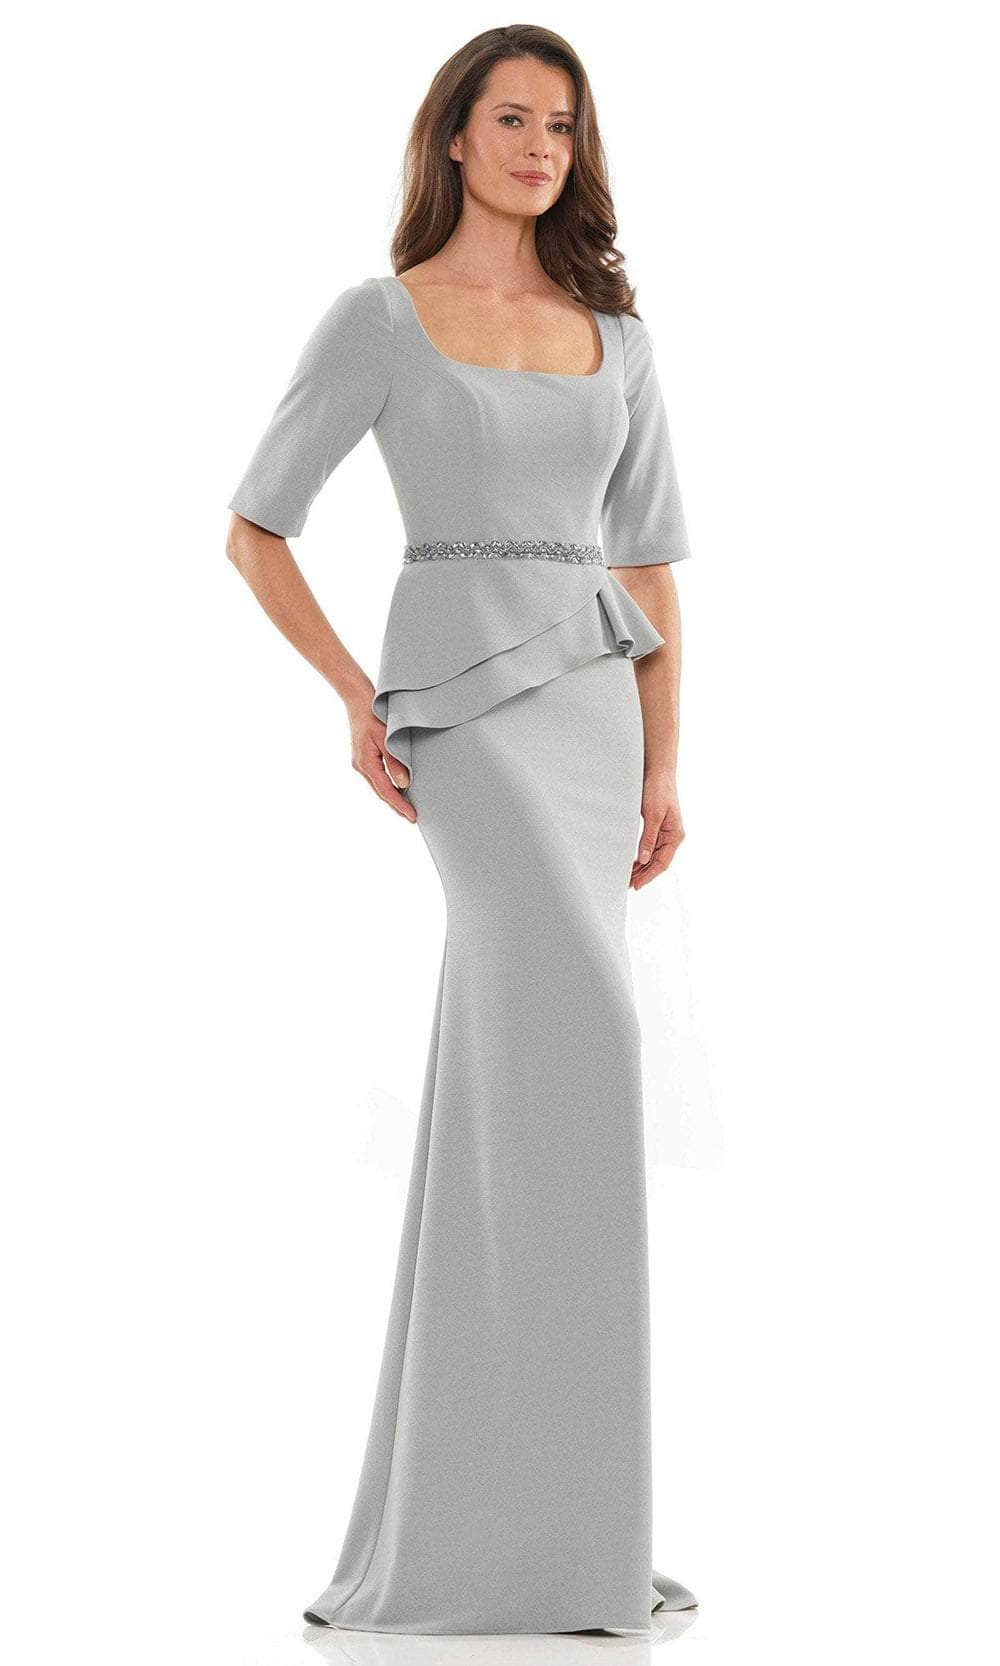 Rina Di Montella RD2761 - 3/4 Sleeves Square Neck Long Dress Special Occasion Dress 4 / Seaglass